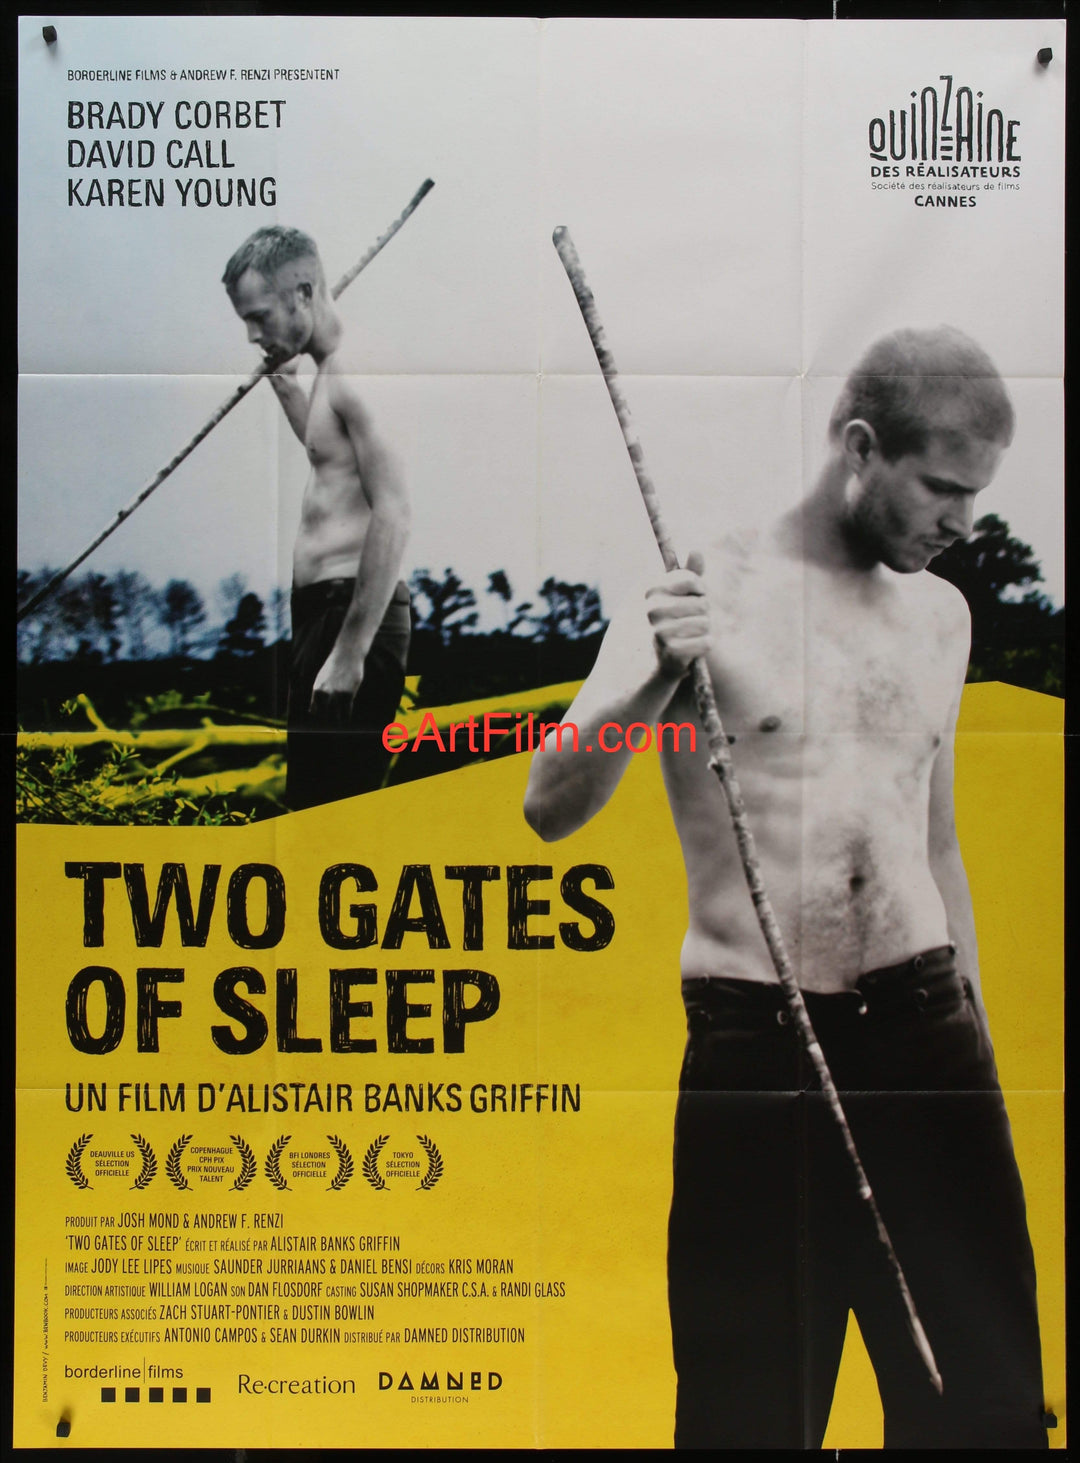 eArtFilm.com French 1 Panel Grande (46"x62") Two Gates Of Sleep 2011 45x62 French Alistair Banks Griffin Cannes-Deauville Nominee